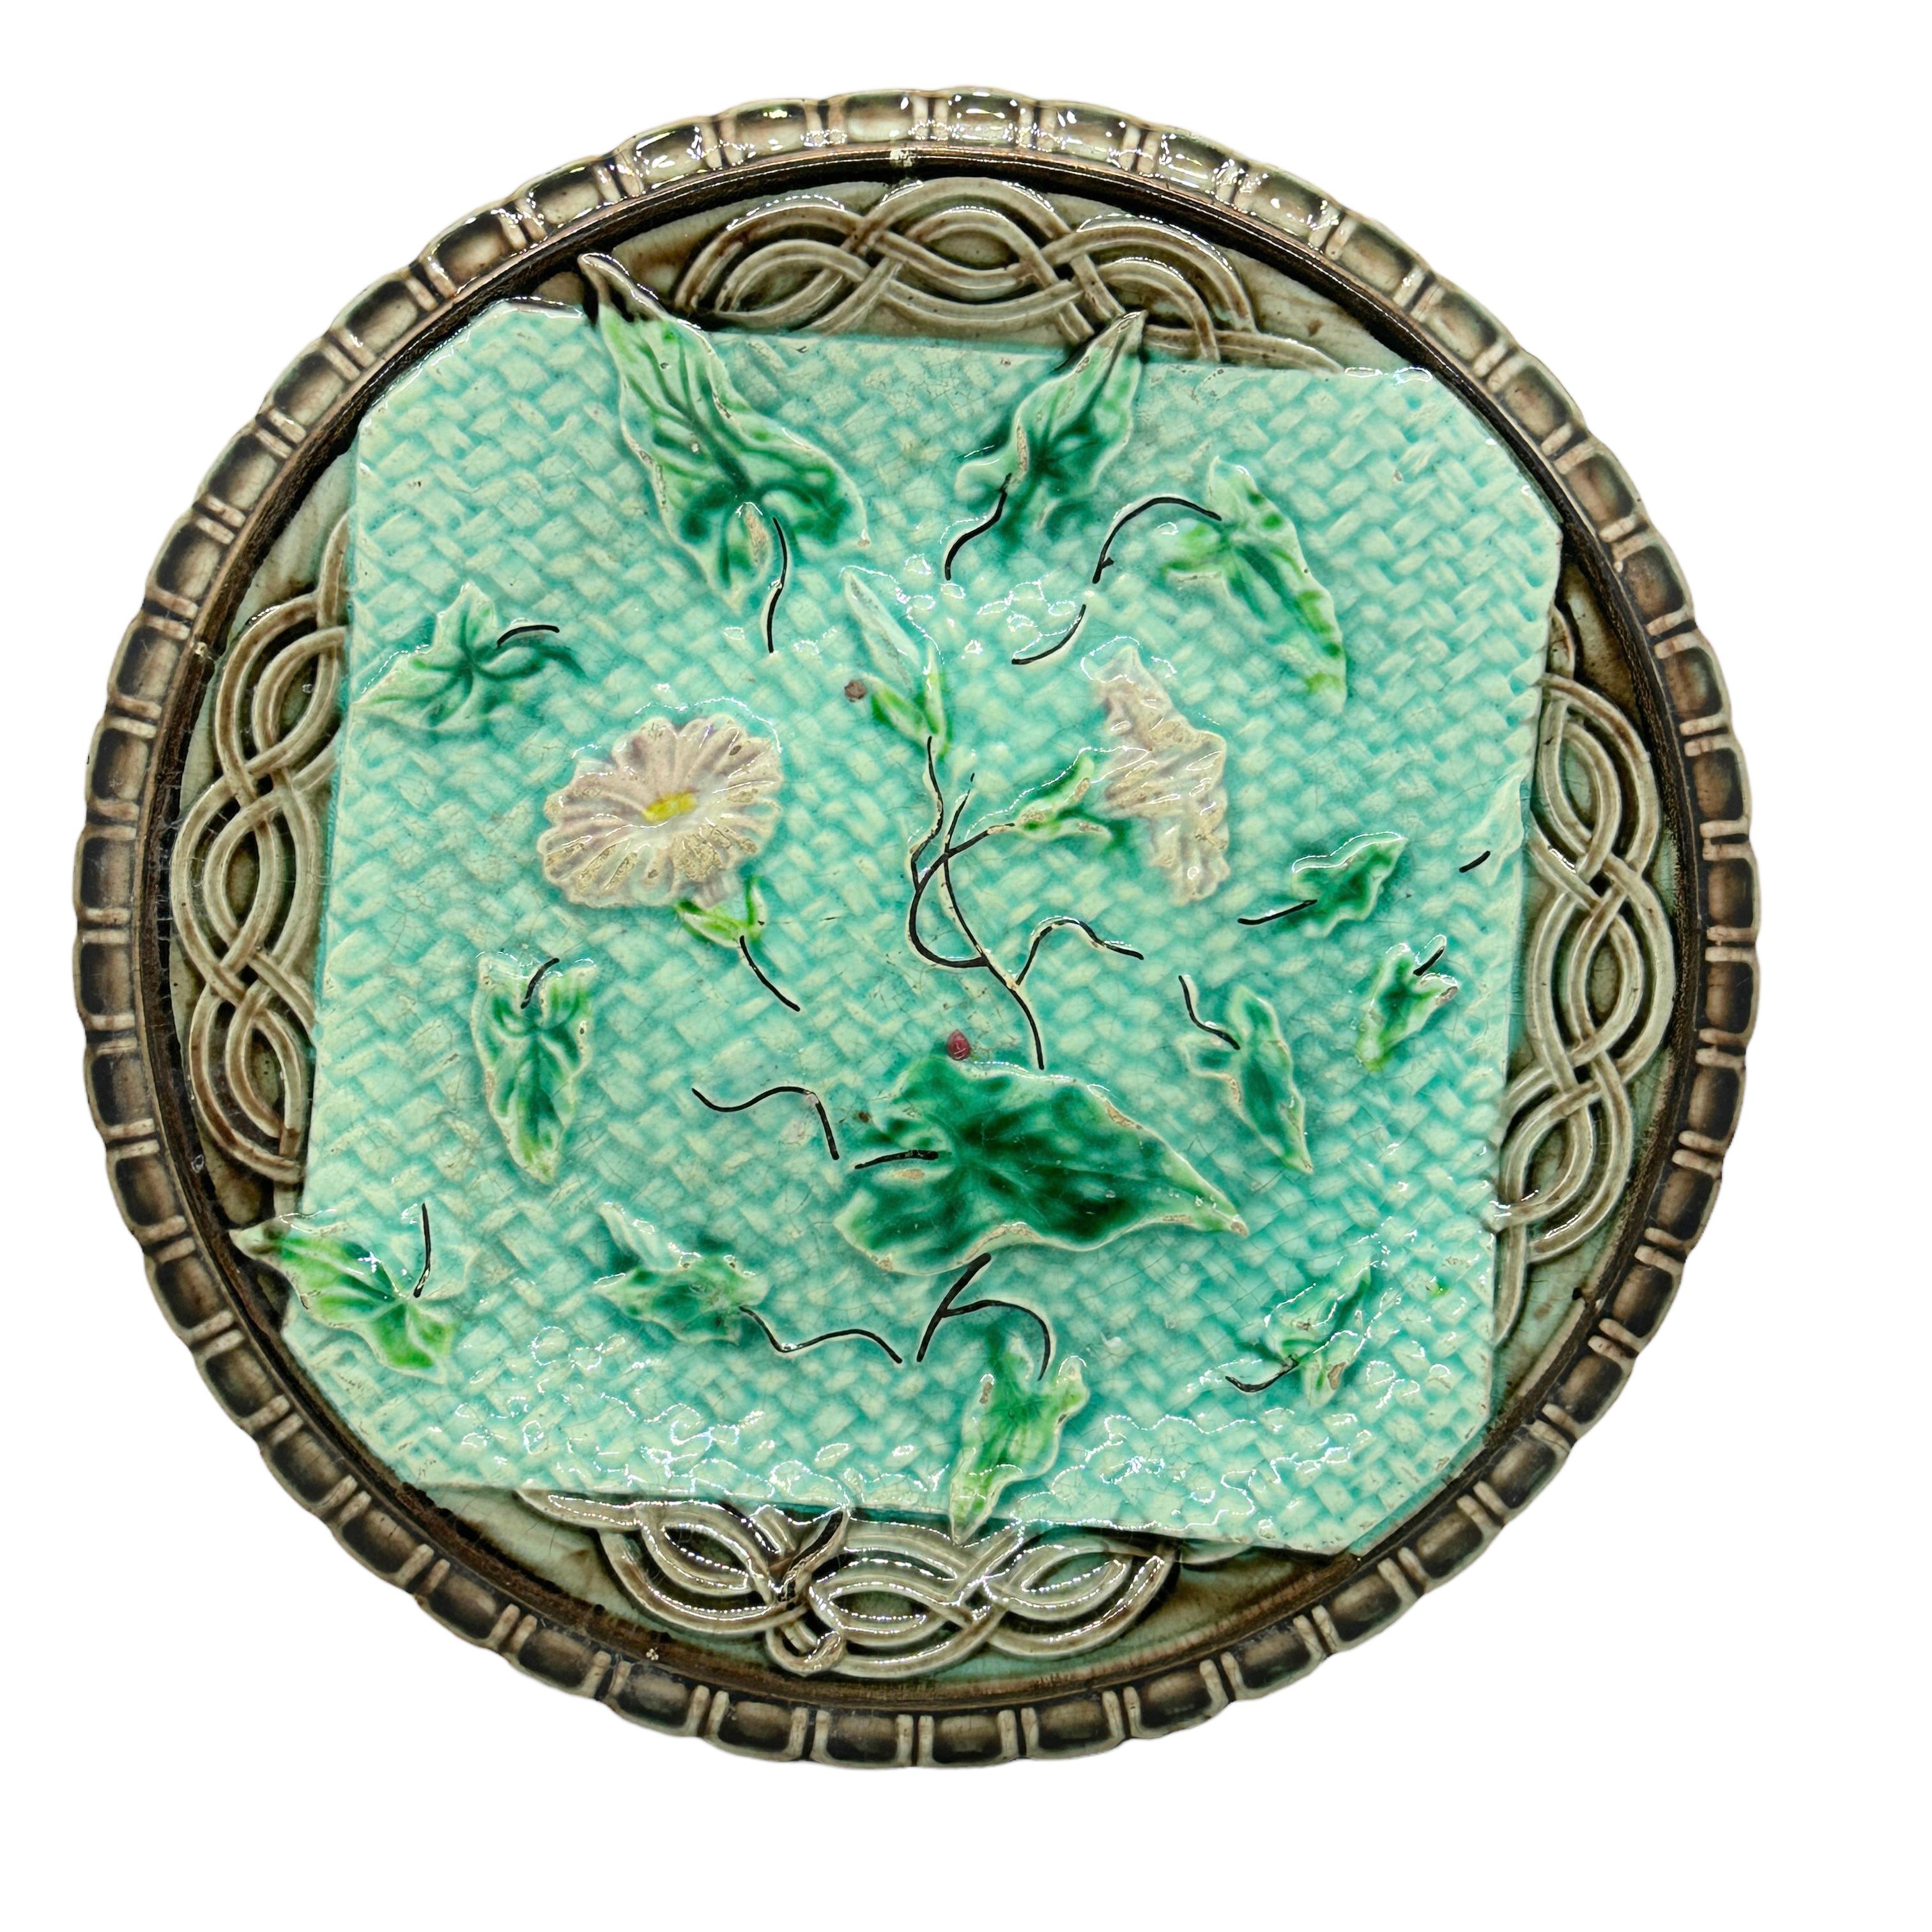 Early 20th century German majolica plate with morning glory on a blue basket weave and a brown border, circa 1900. Small cracks in the glazing, glazing craquelure, chip at the backside. Nice addition to your table or just to display. Please see